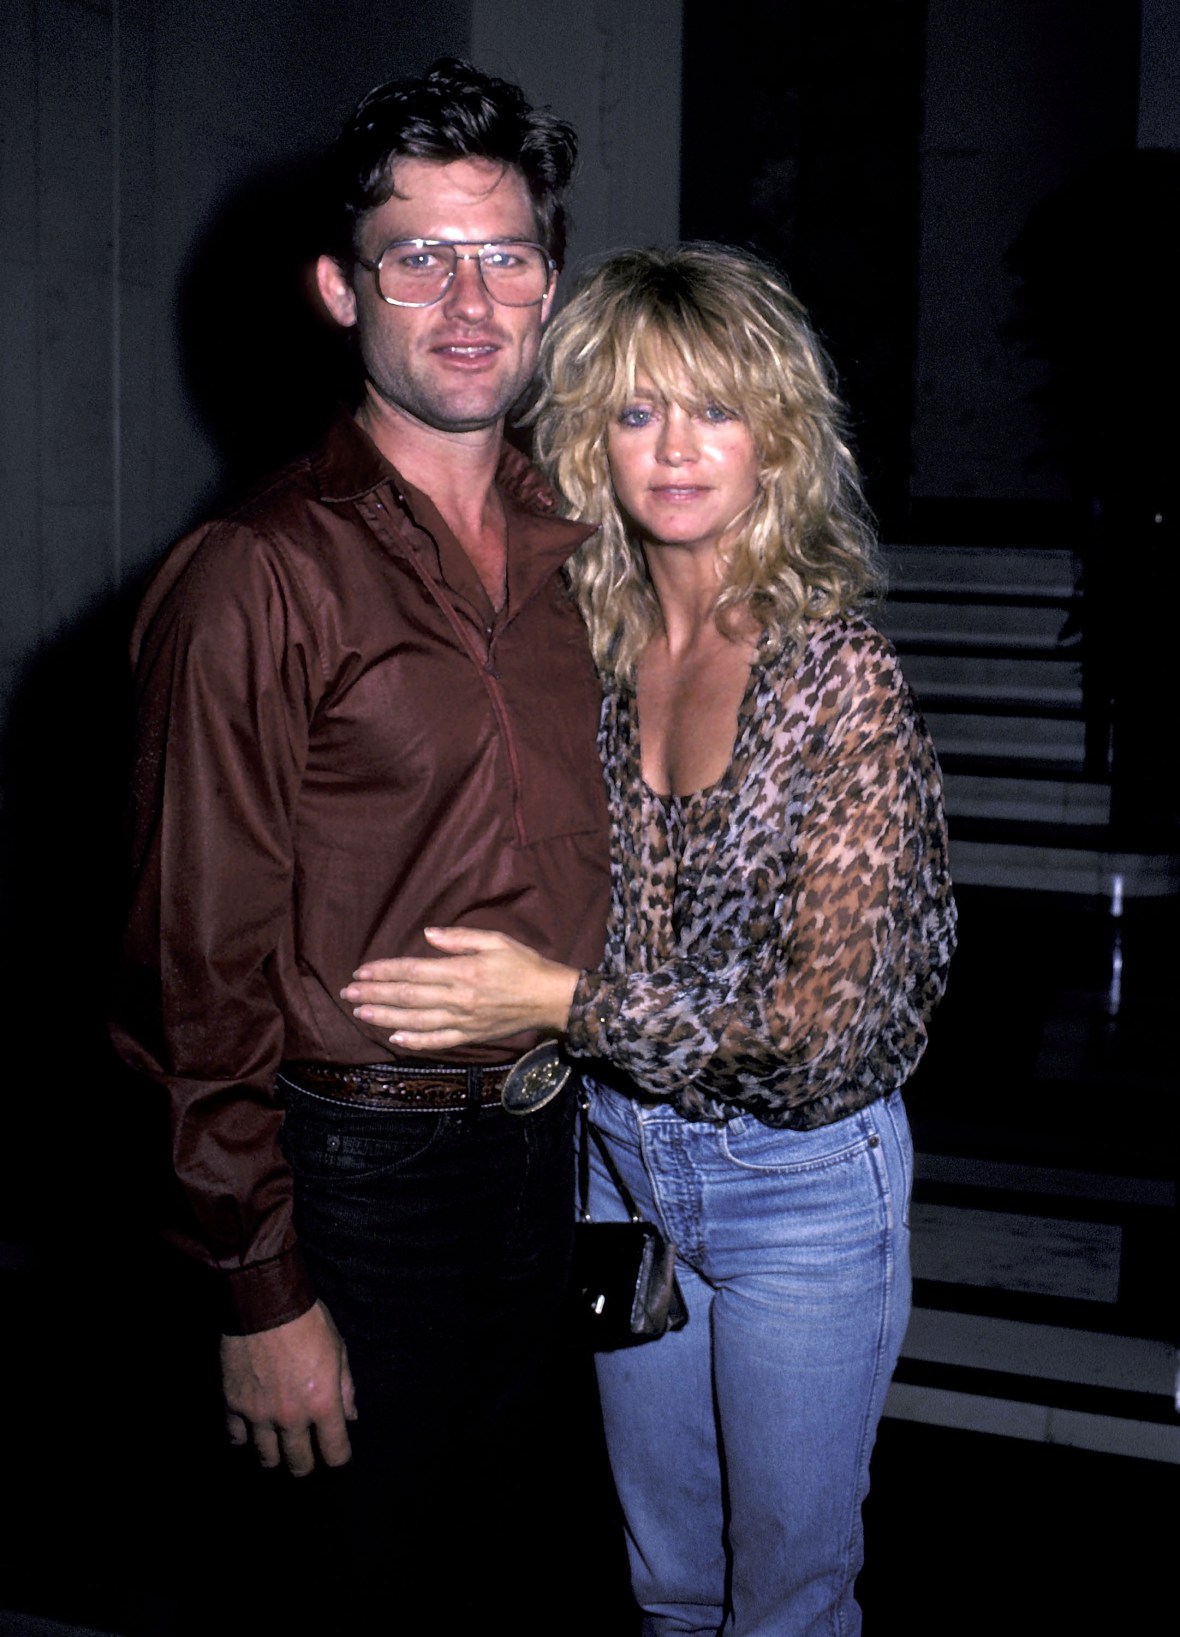 How Did Goldie Hawn and Kurt Russell Meet? Inside Their Relationship!